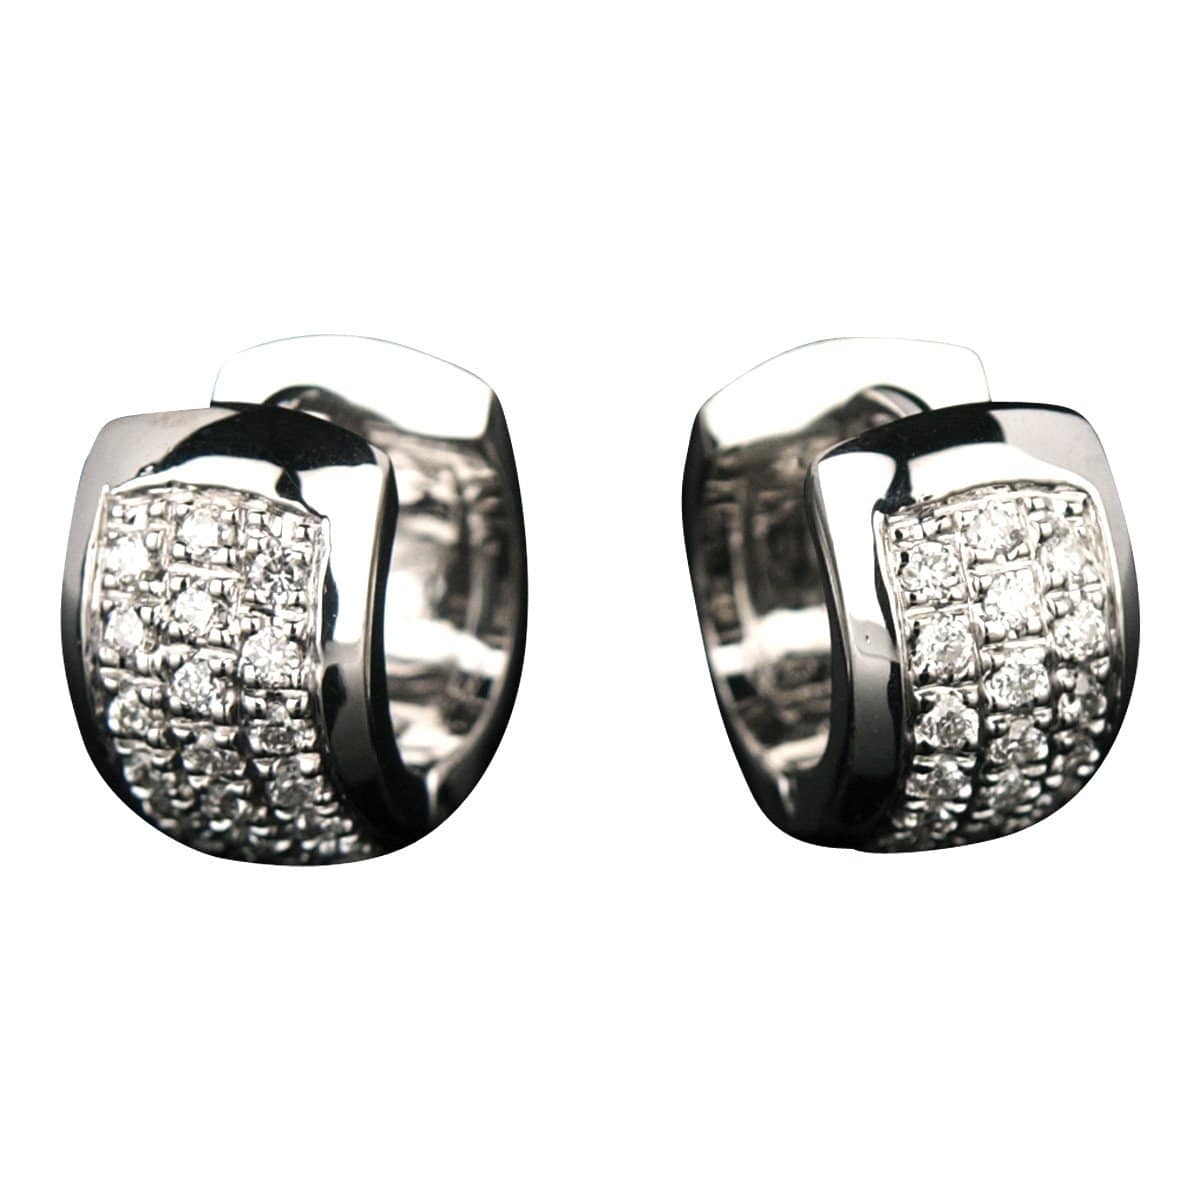 WIDE DIAMOND HUGGIES EARRINGS - Chris Aire Fine Jewelry & Timepieces